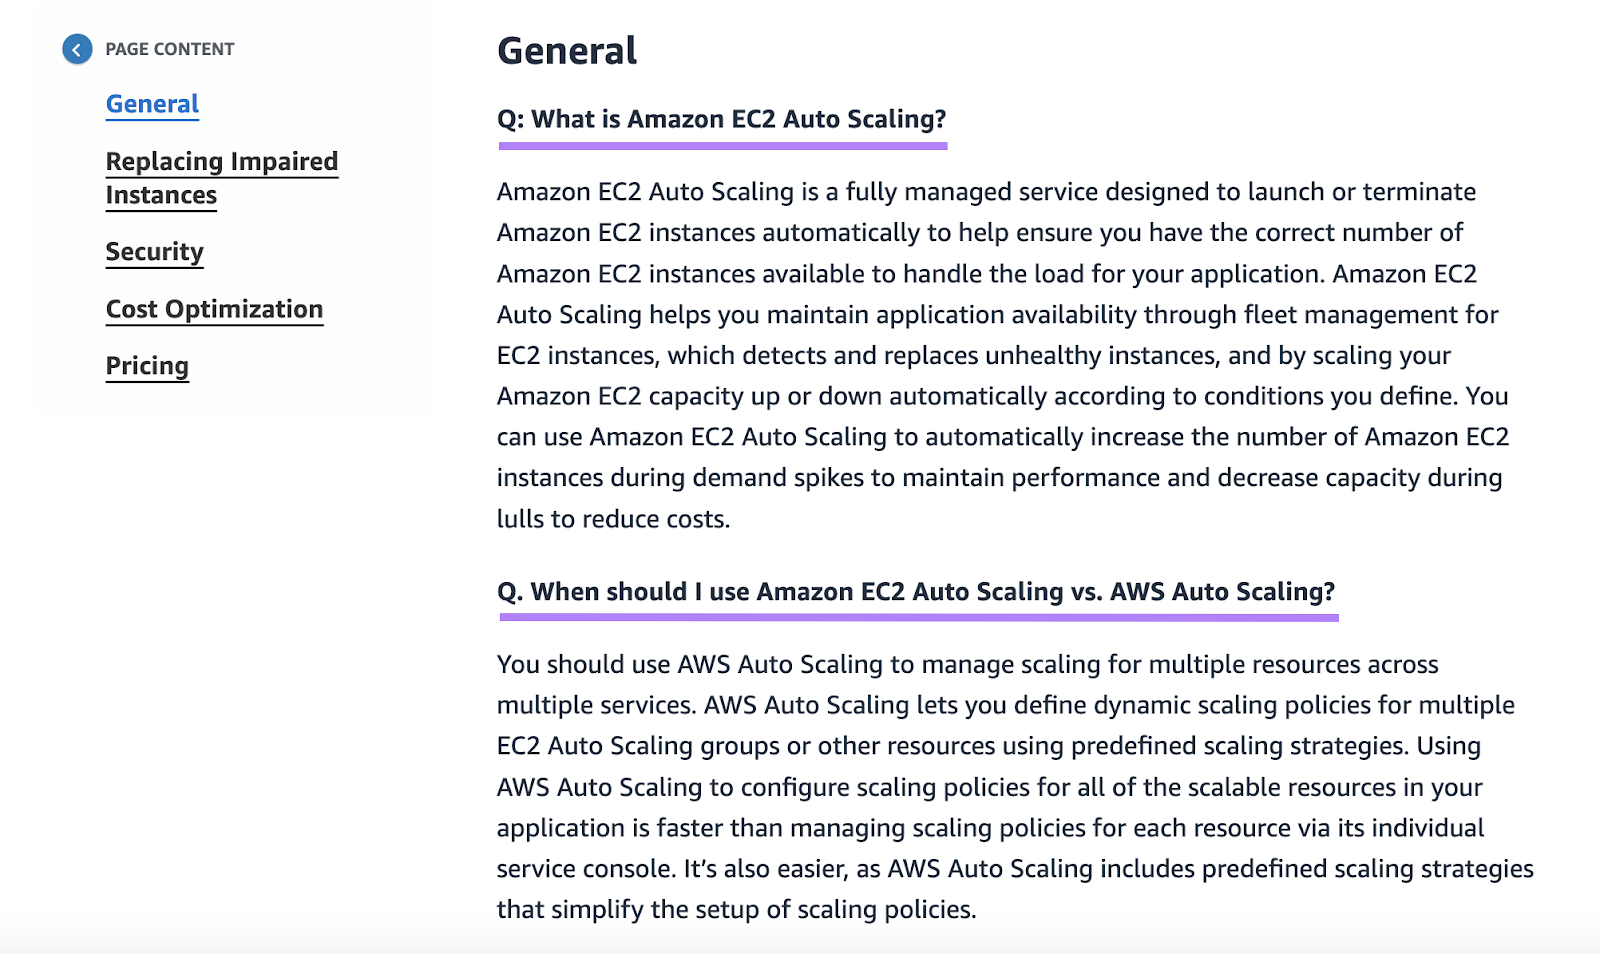 Questions about amazon auto scaling product answered on separate page